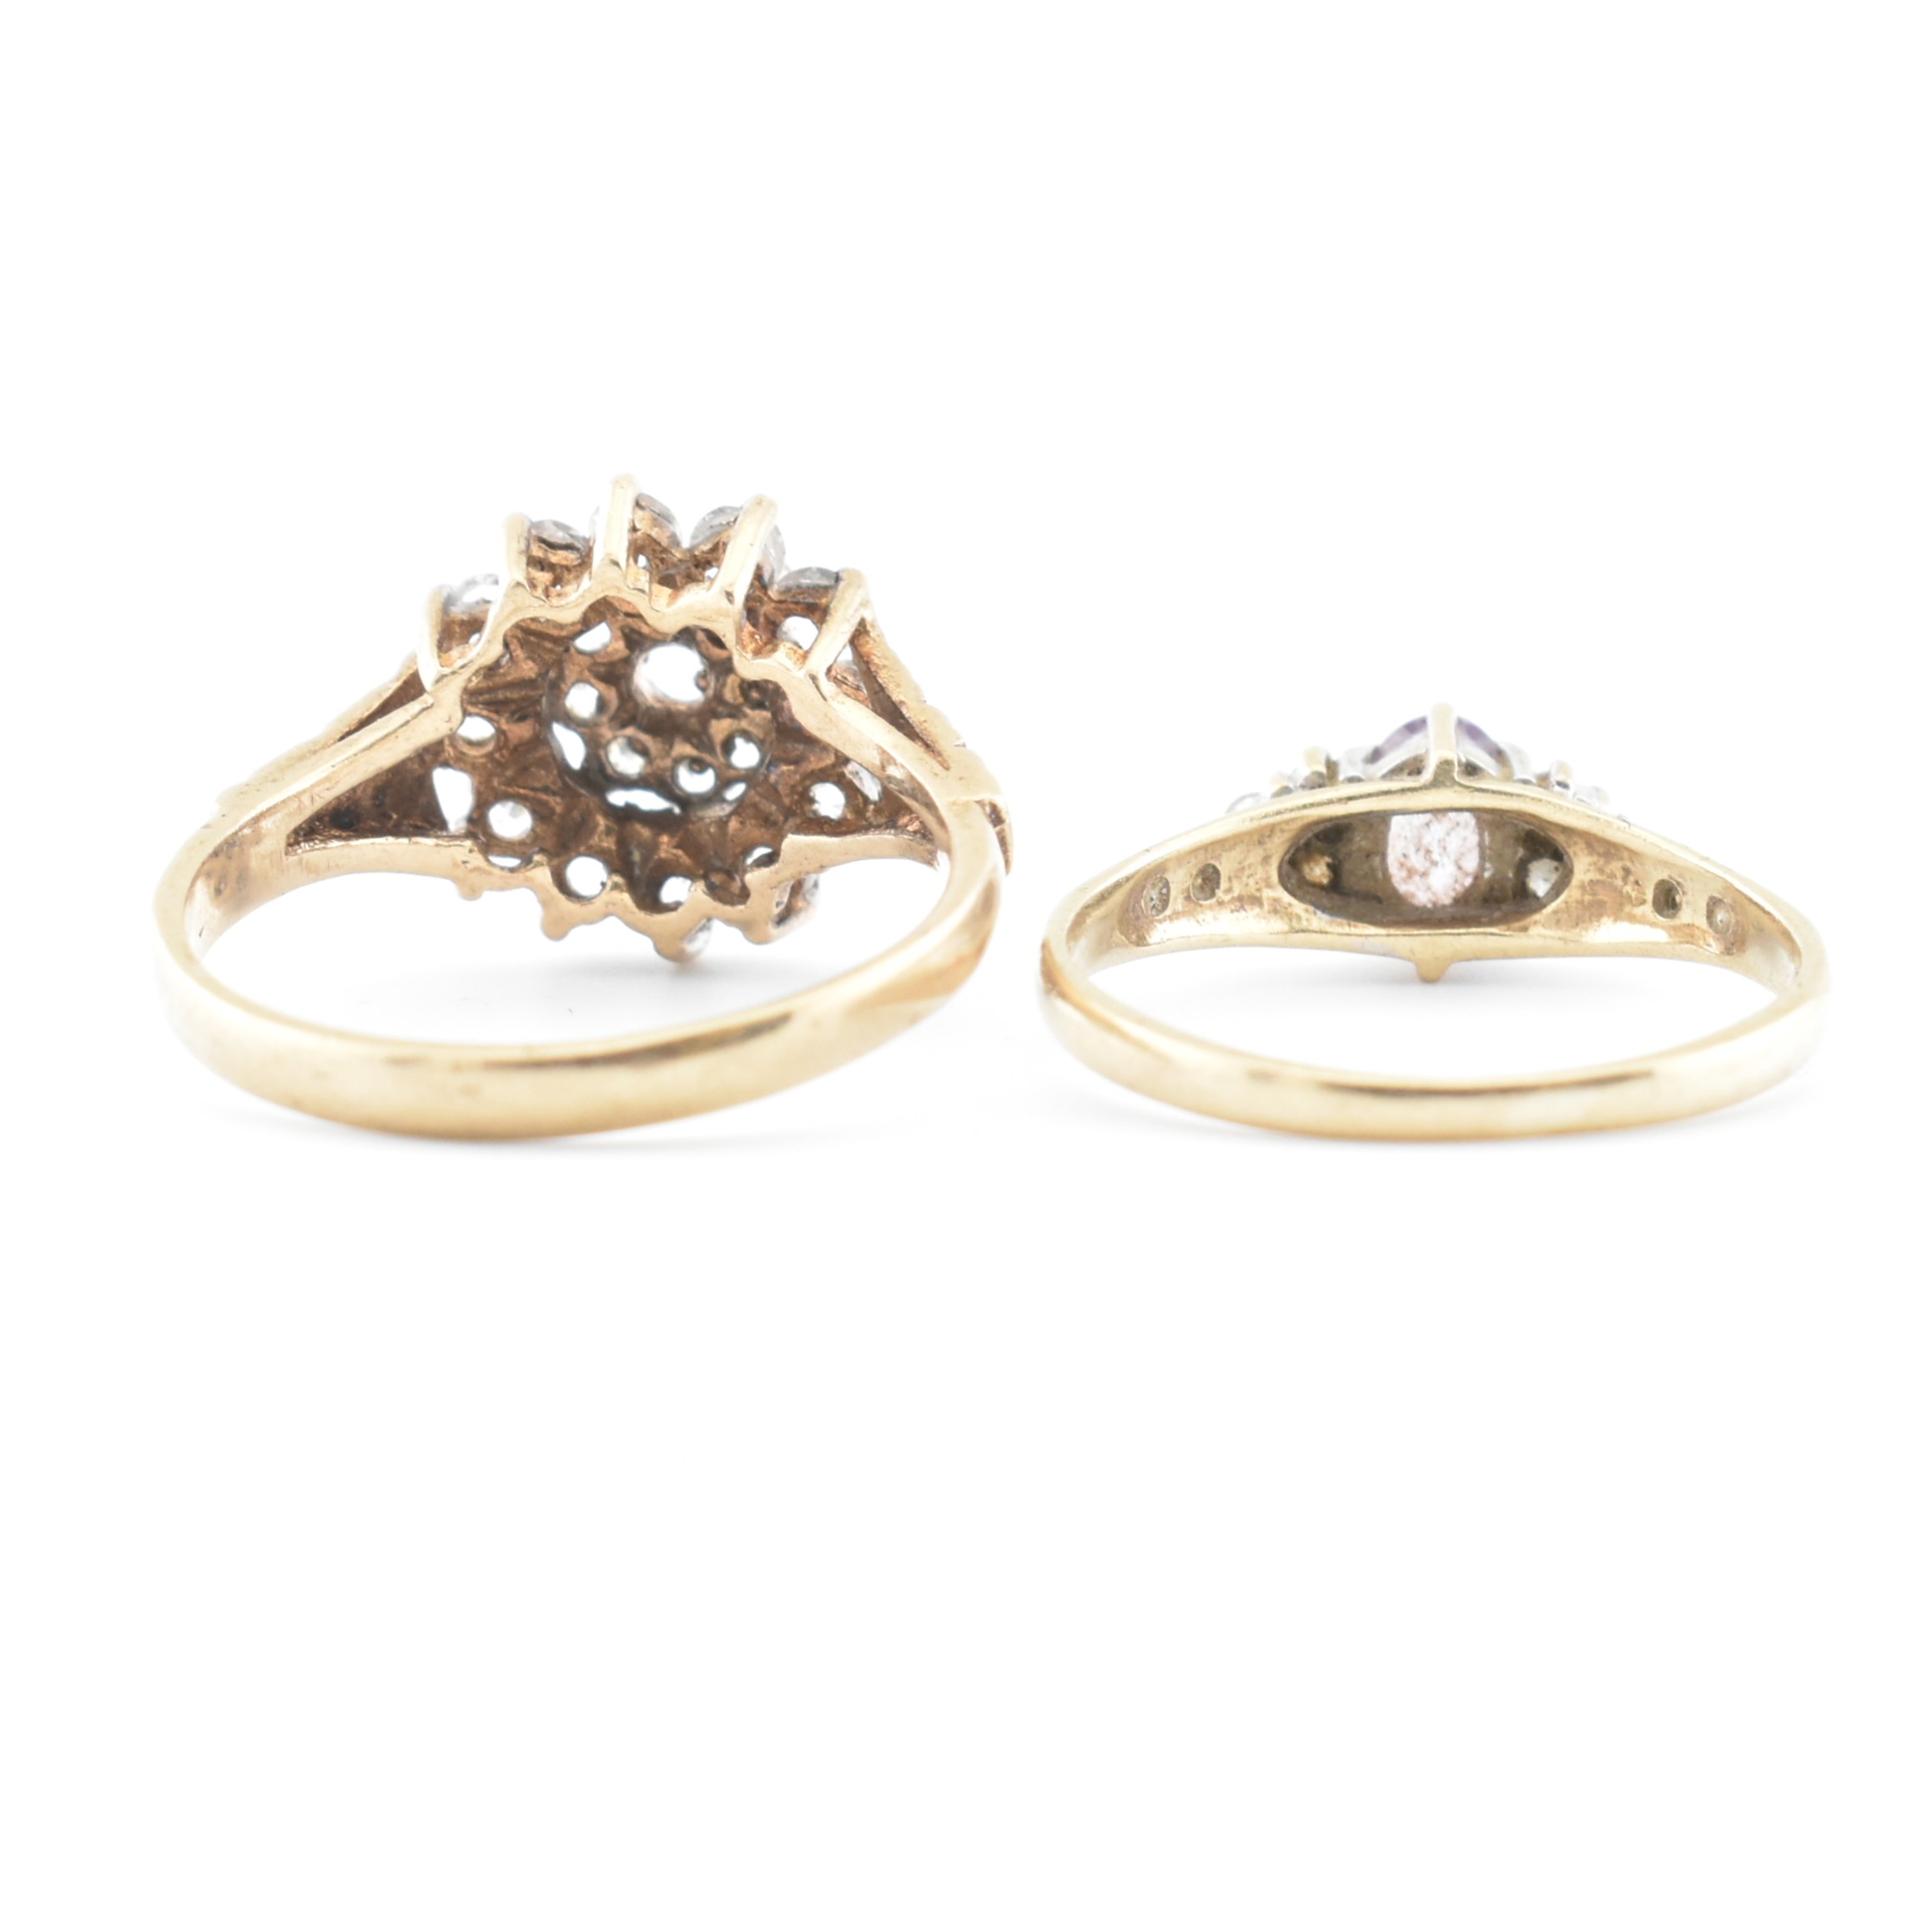 TWO HALLMARKED 9CT GOLD CLUSTER RINGS - Image 3 of 6